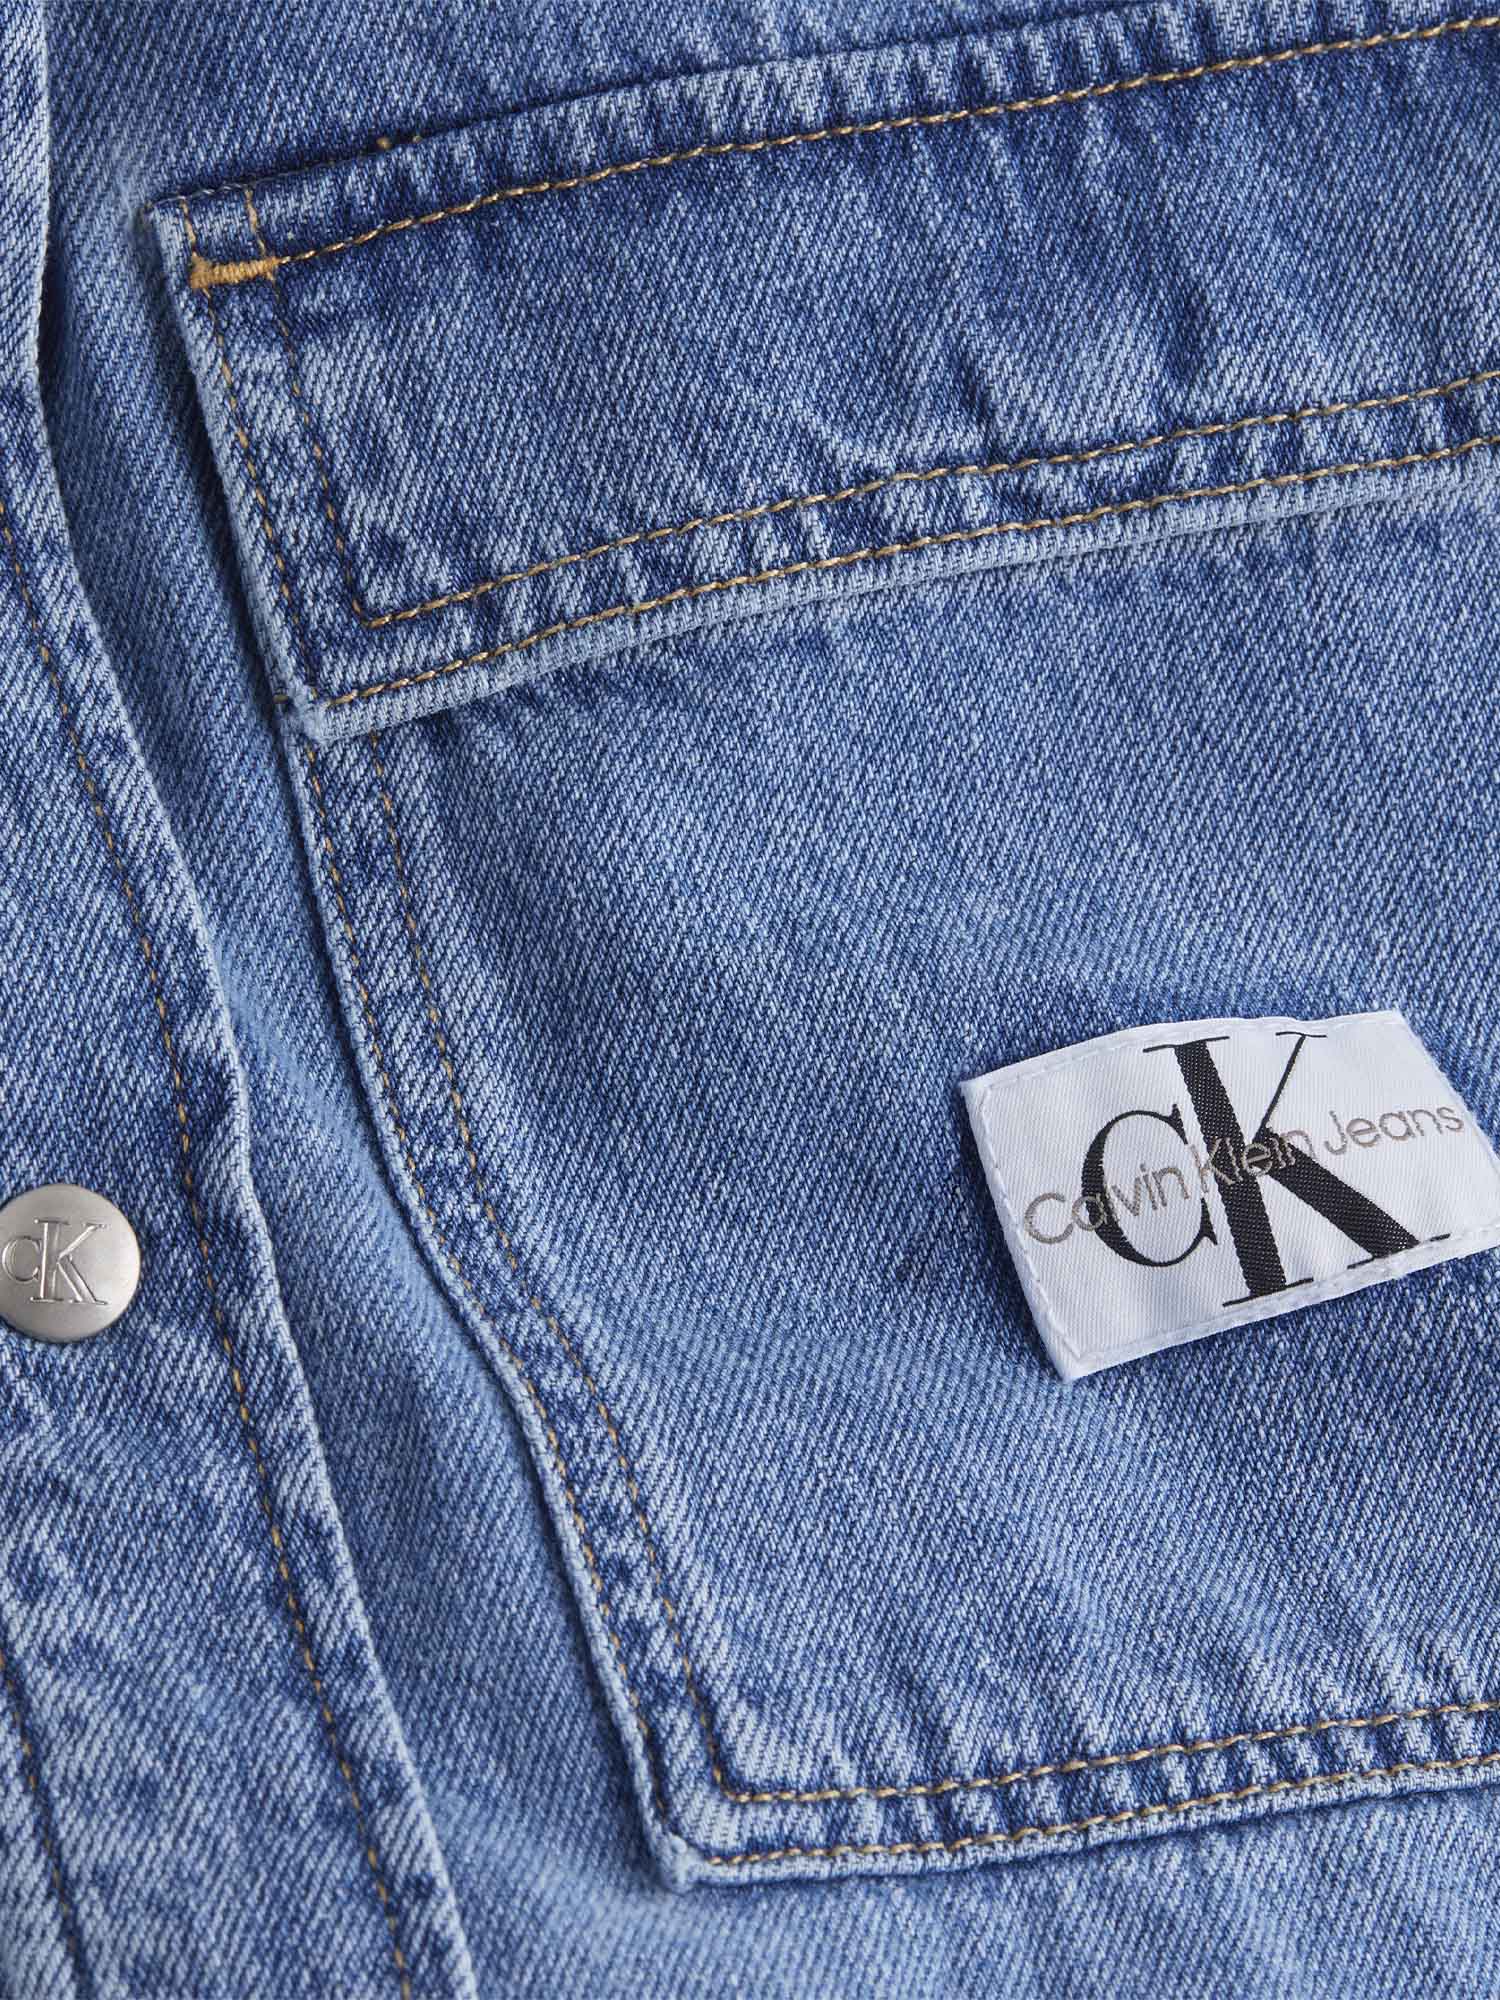 CK RELAXED DENIM - JEANS